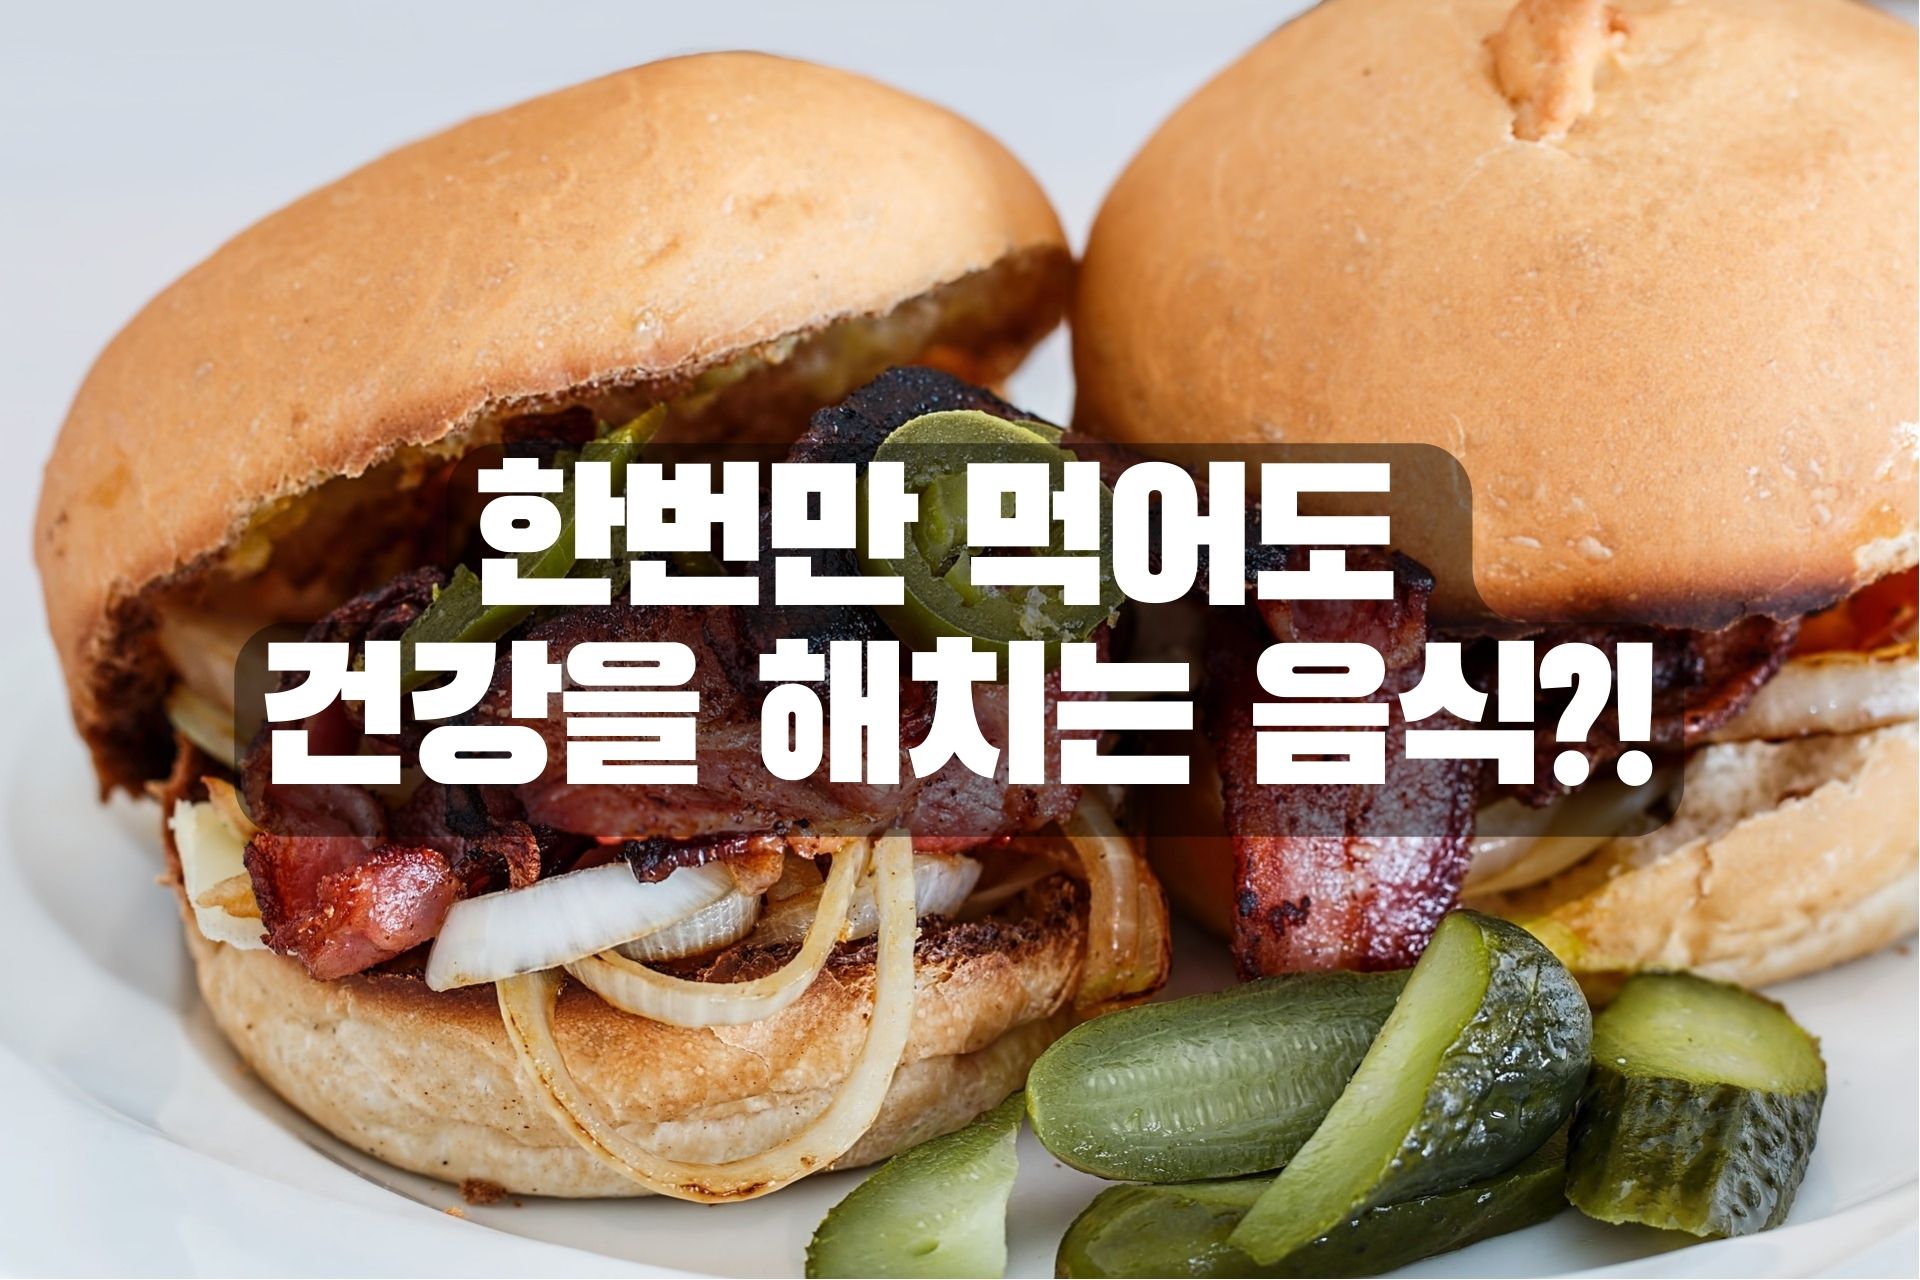 Read more about the article 한번만 먹어도 건강을 해치는 음식 8가지?!